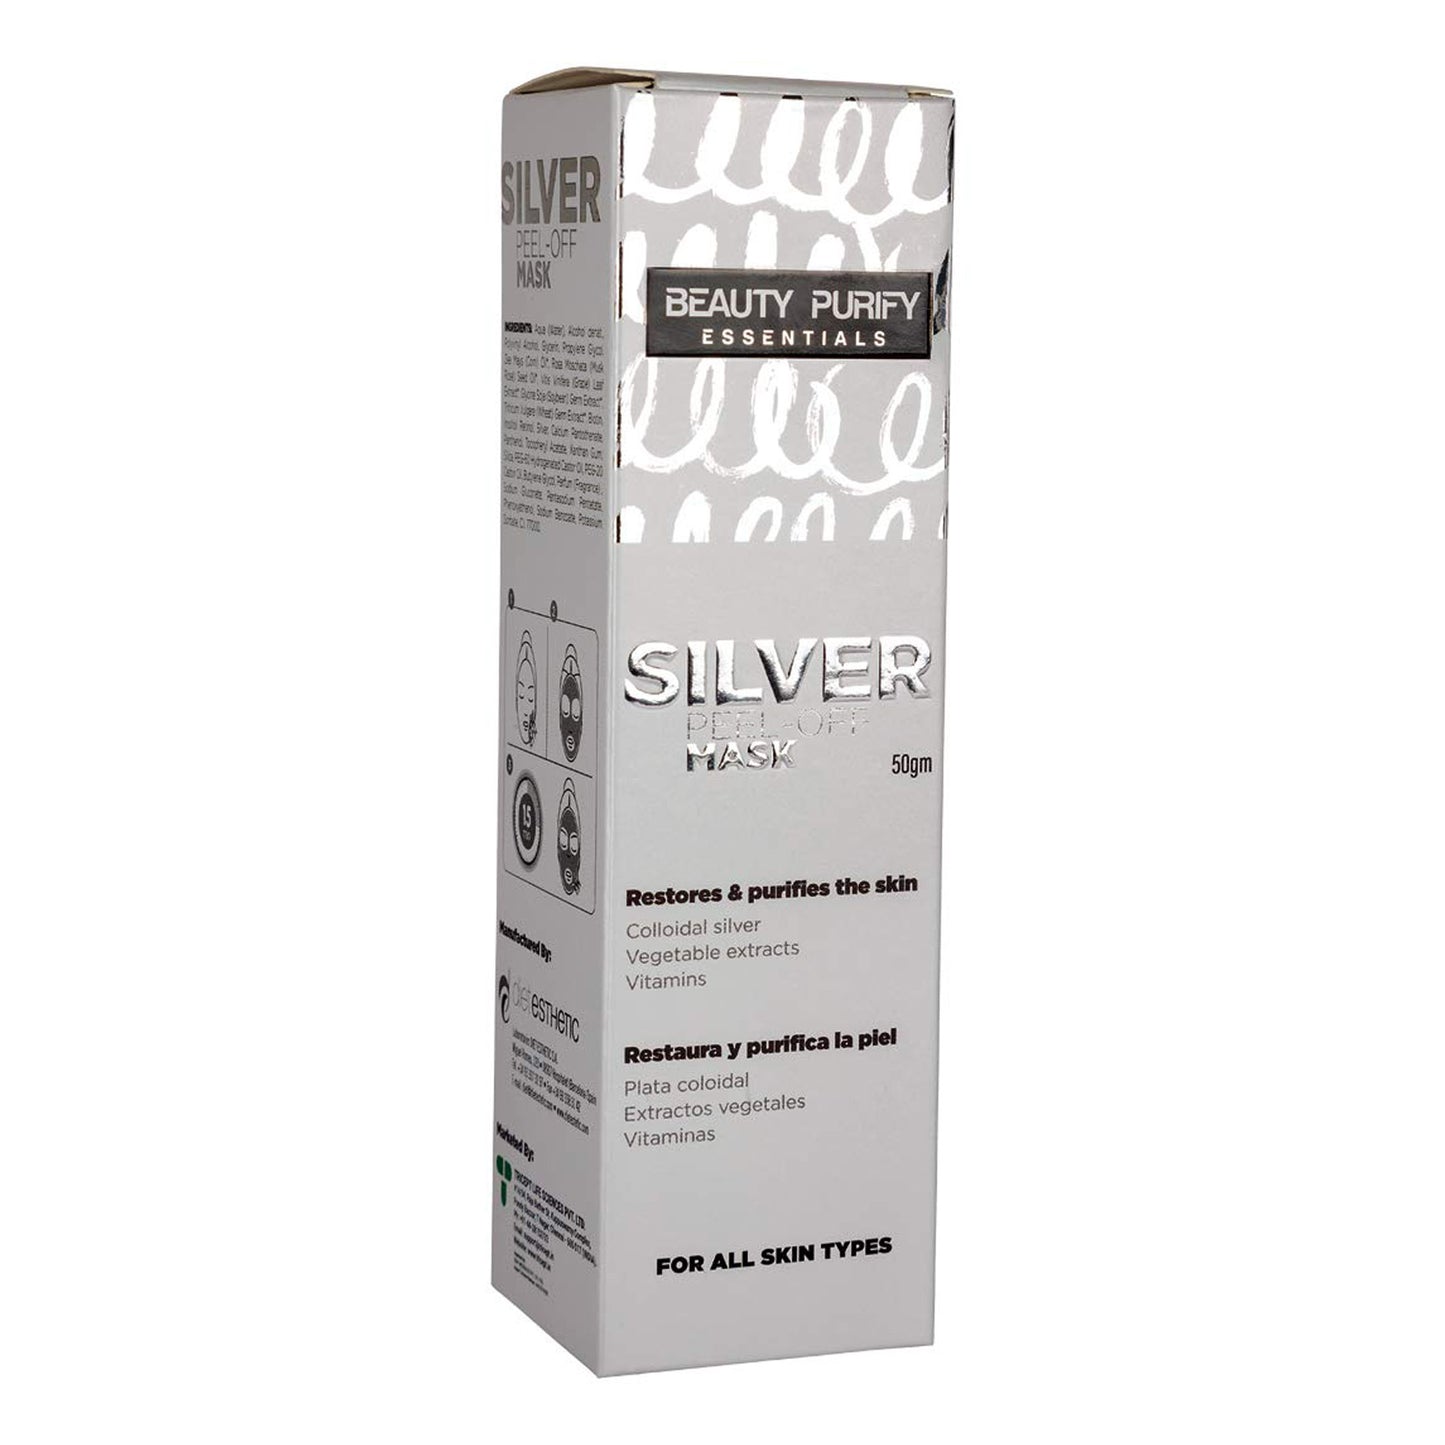 Beauty Purify Essentials Silver Peel-off Mask, 50gm